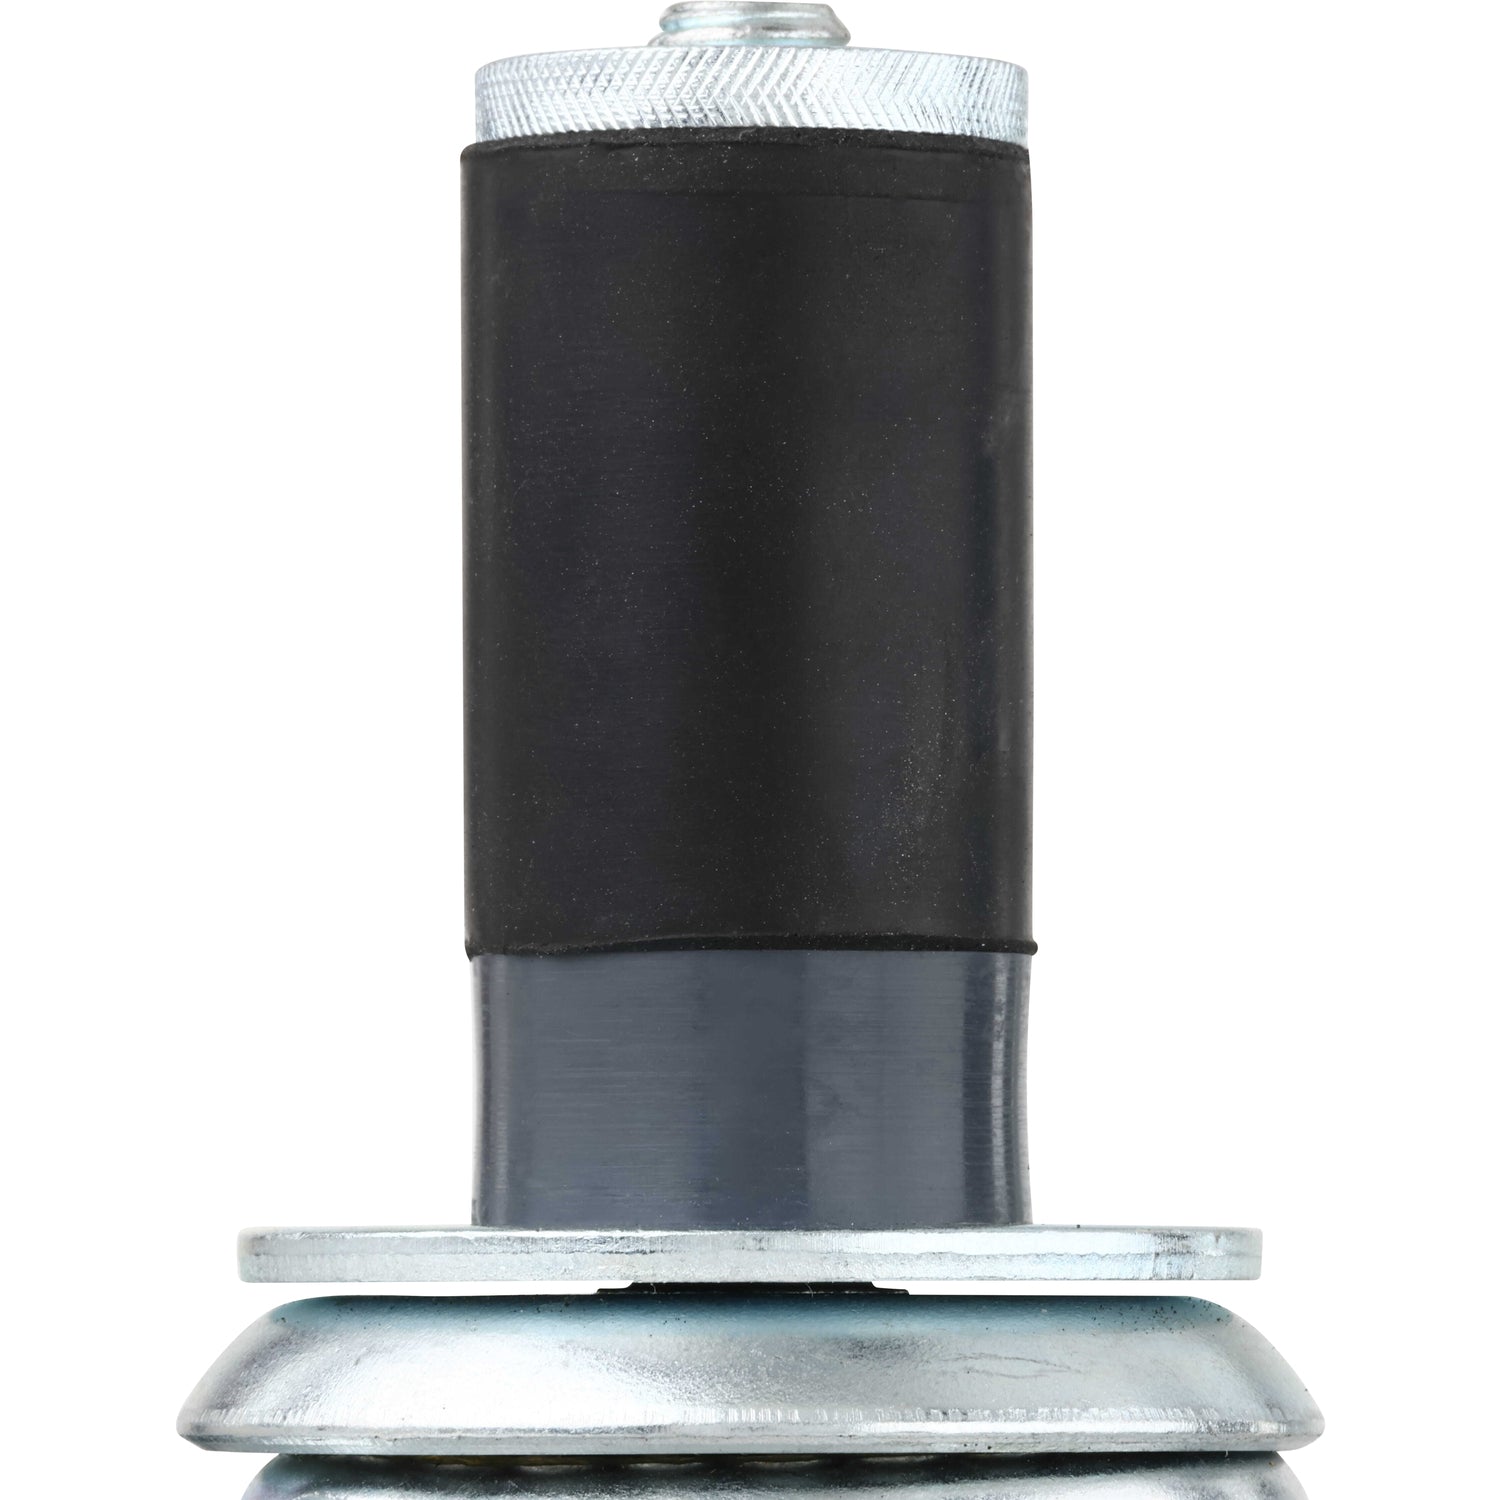 Black rubber tension mount section of caster with nickel plated knurled cap on top shown on white background. 